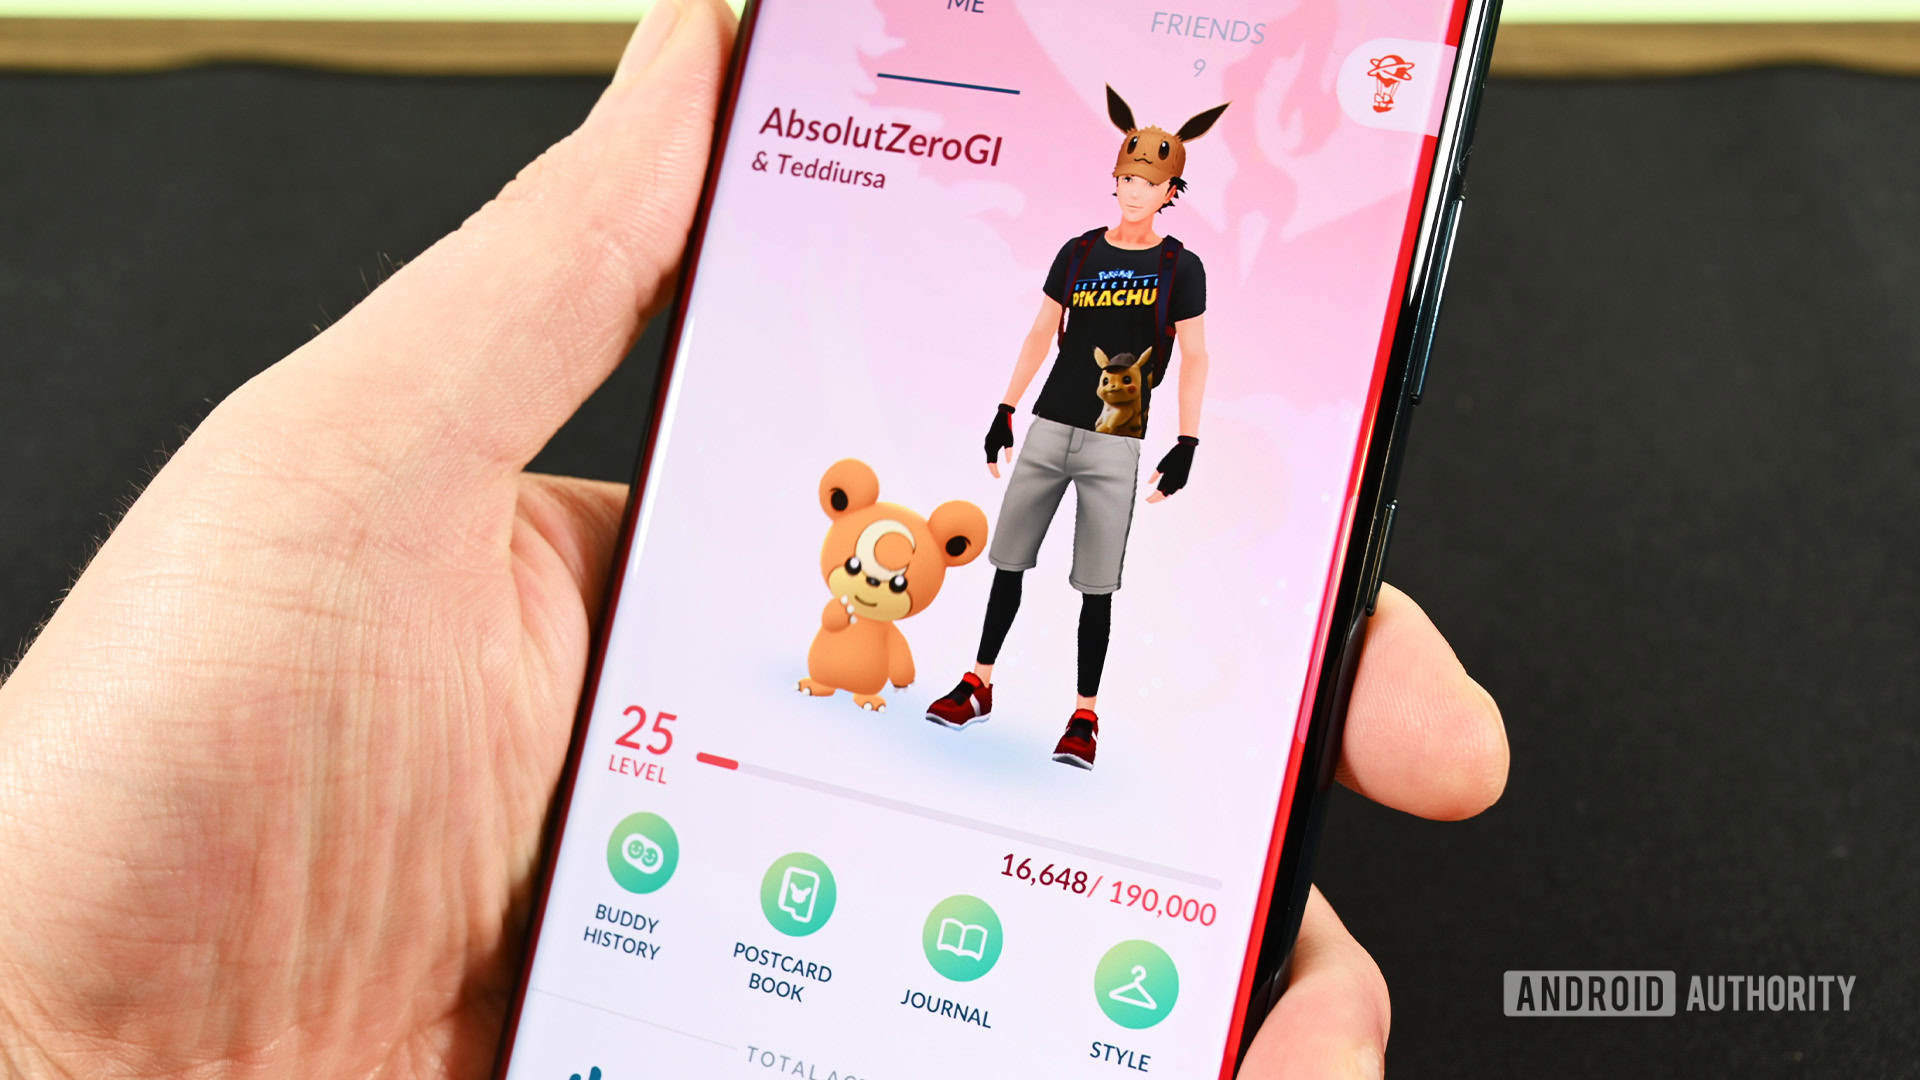 The best offline Android games in 2023 - Android Authority